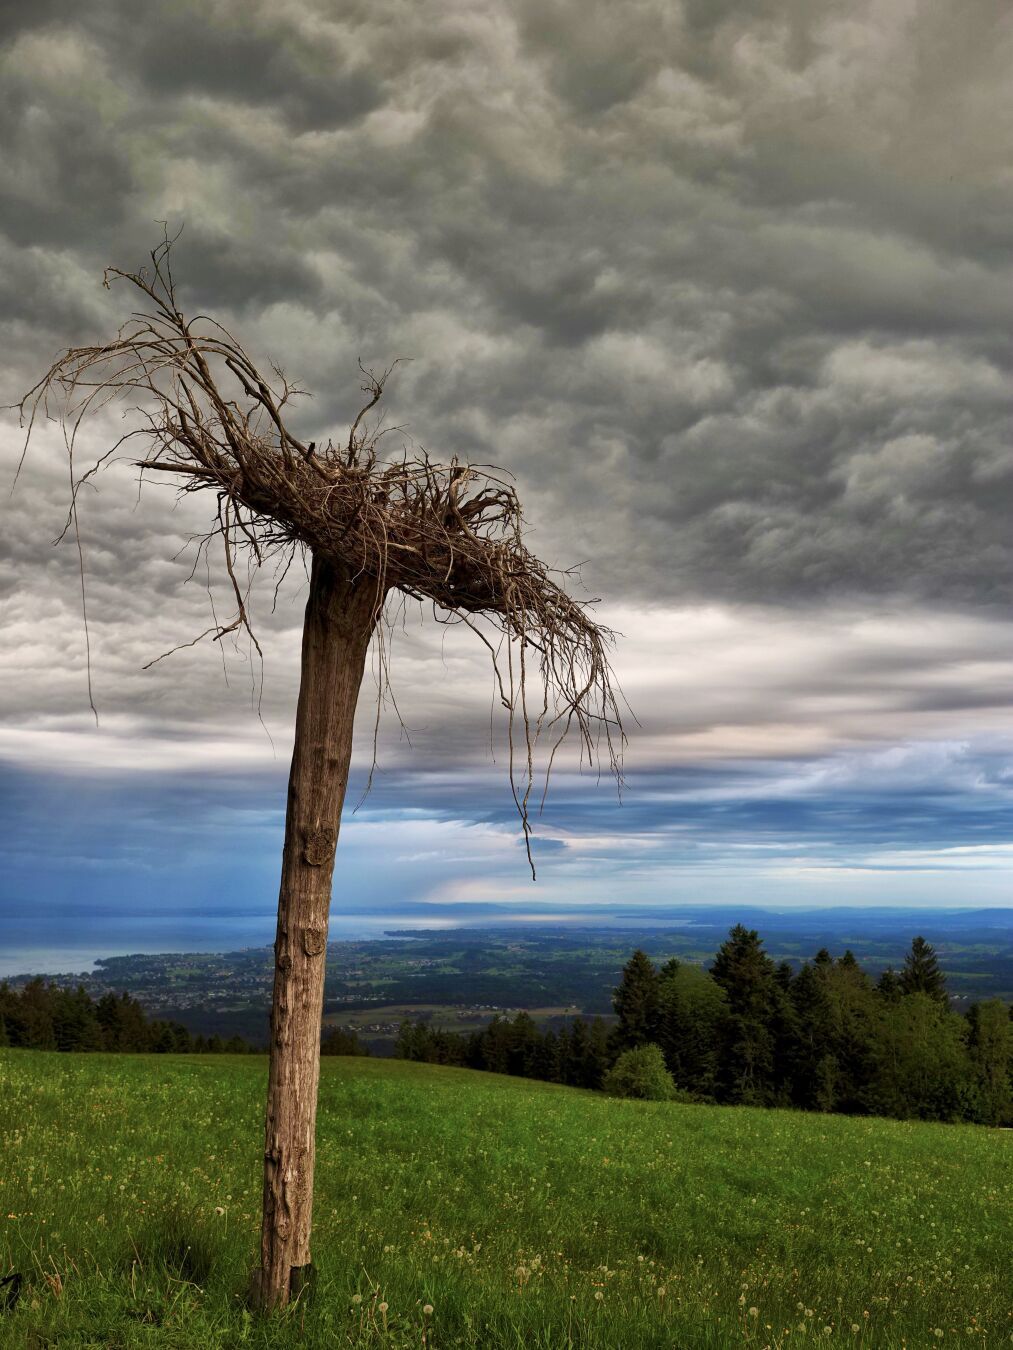 upside down tree

#photography #nature #thunderstorm #lakeconstance #silentsunday